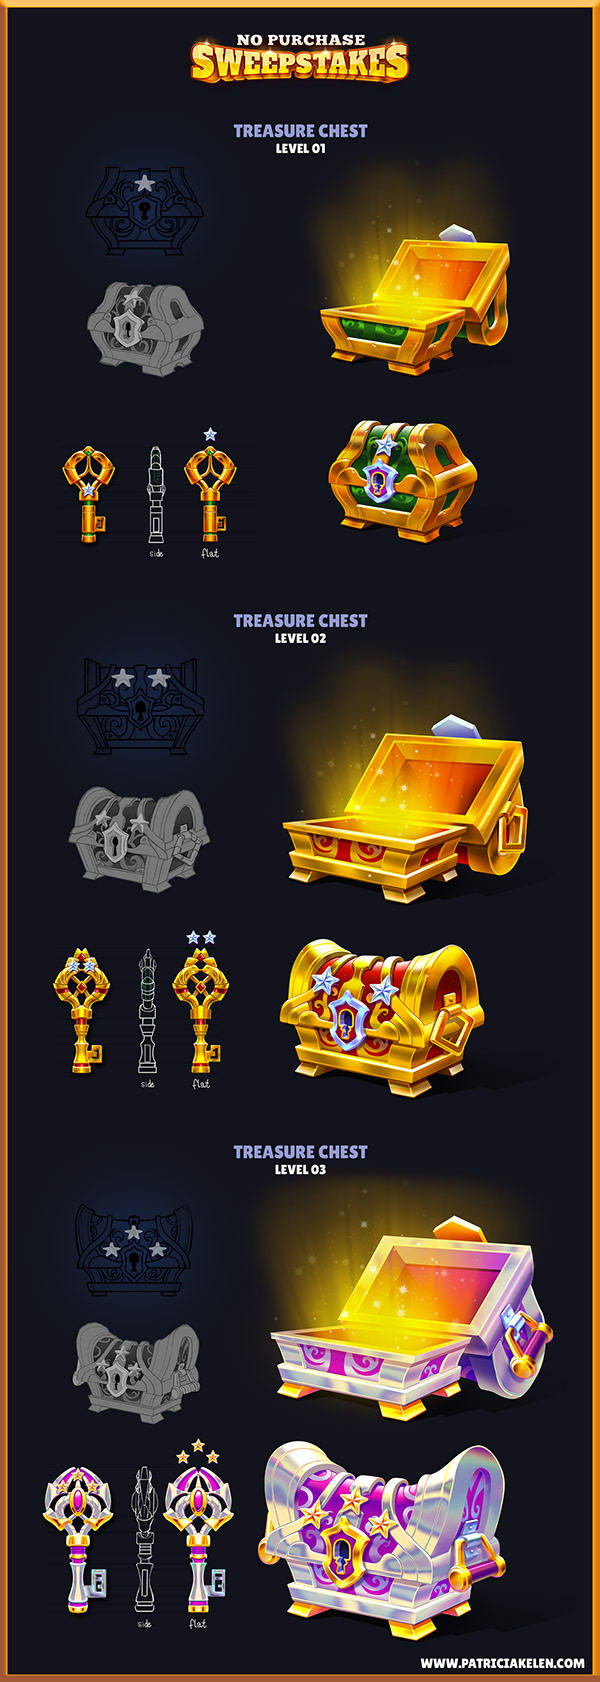 Treasure Chests - Sweepstakes